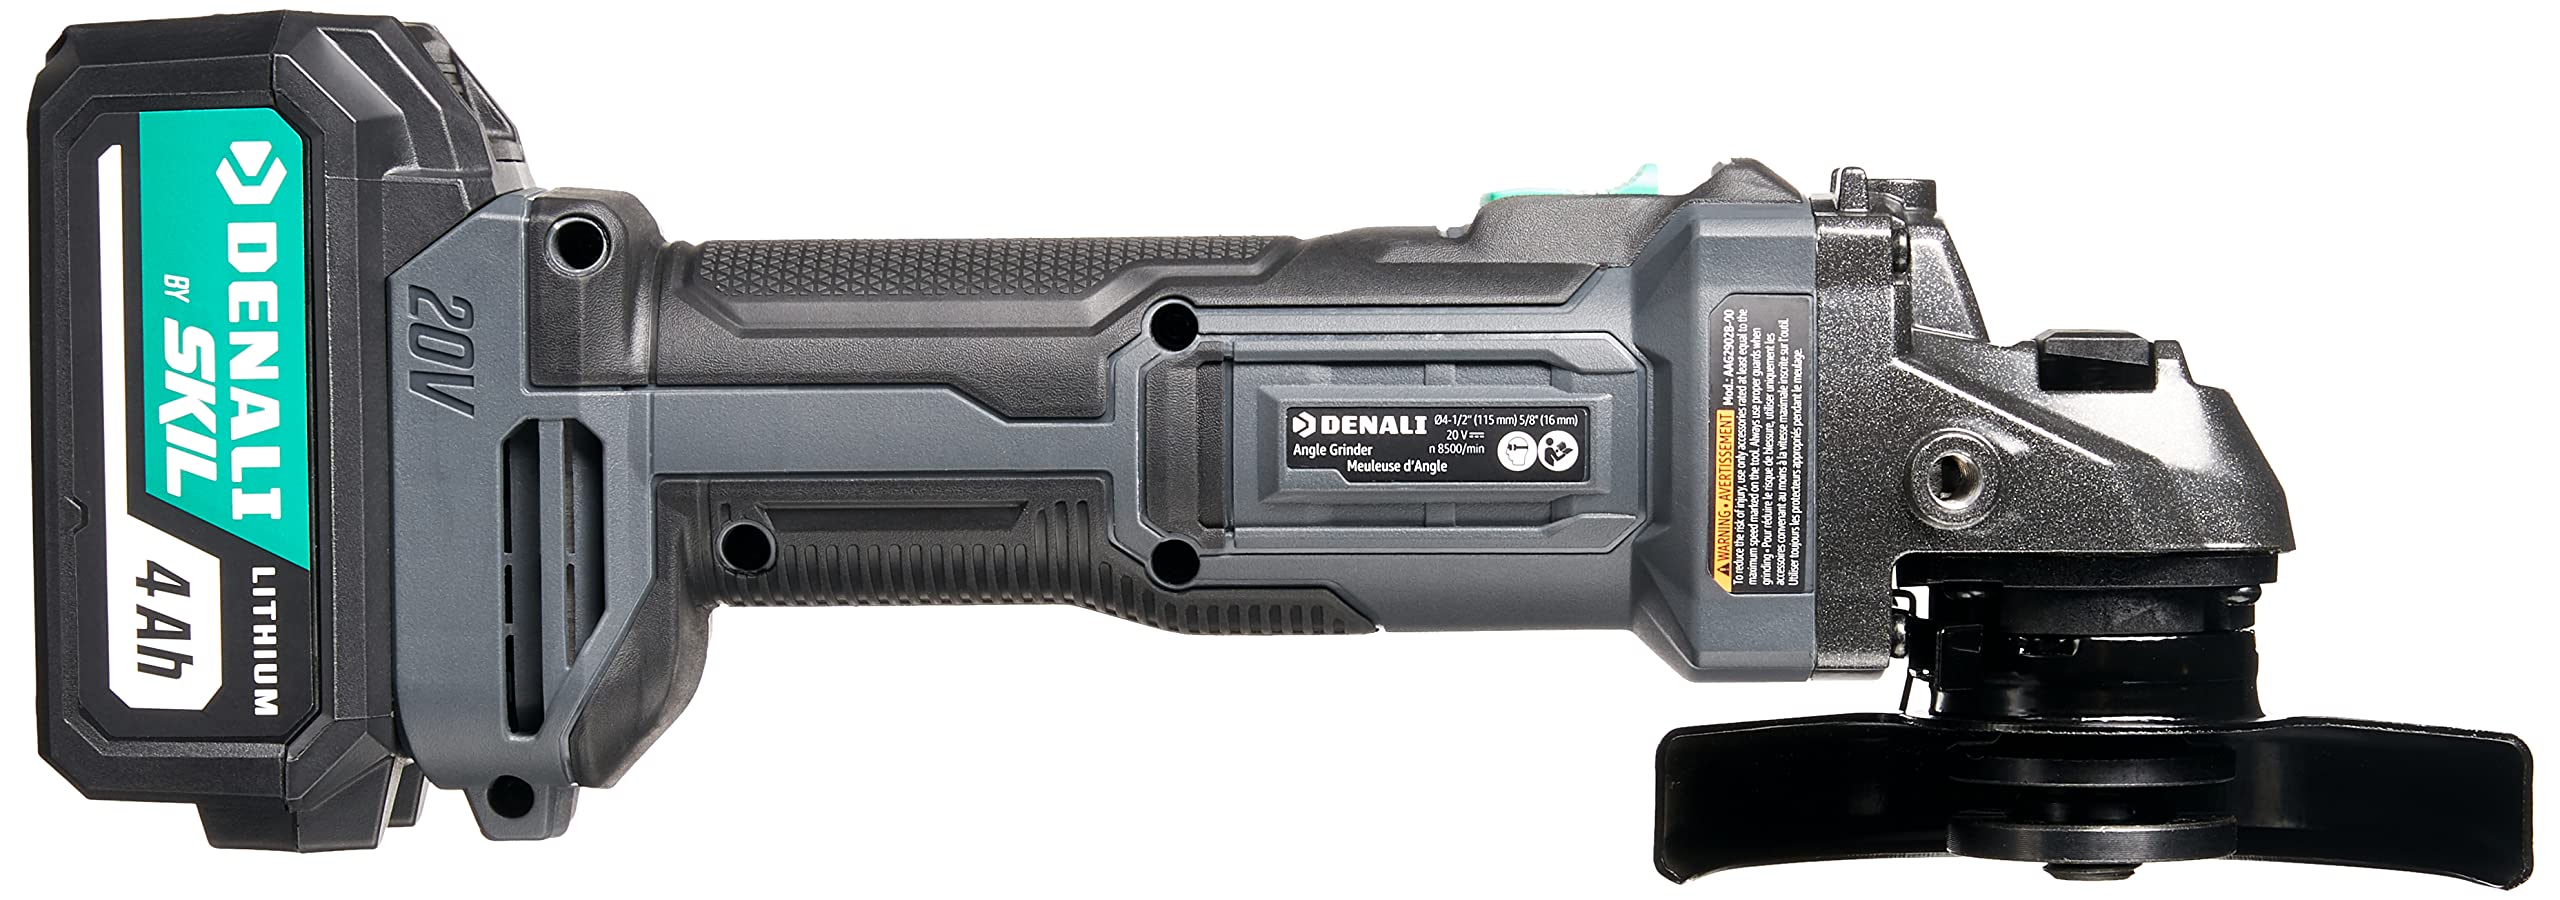 Amazon Brand - Denali by SKIL 20V Cordless Angle Grinder Kit with 4.0Ah Lithium Battery and 2.4A Charger, Blue